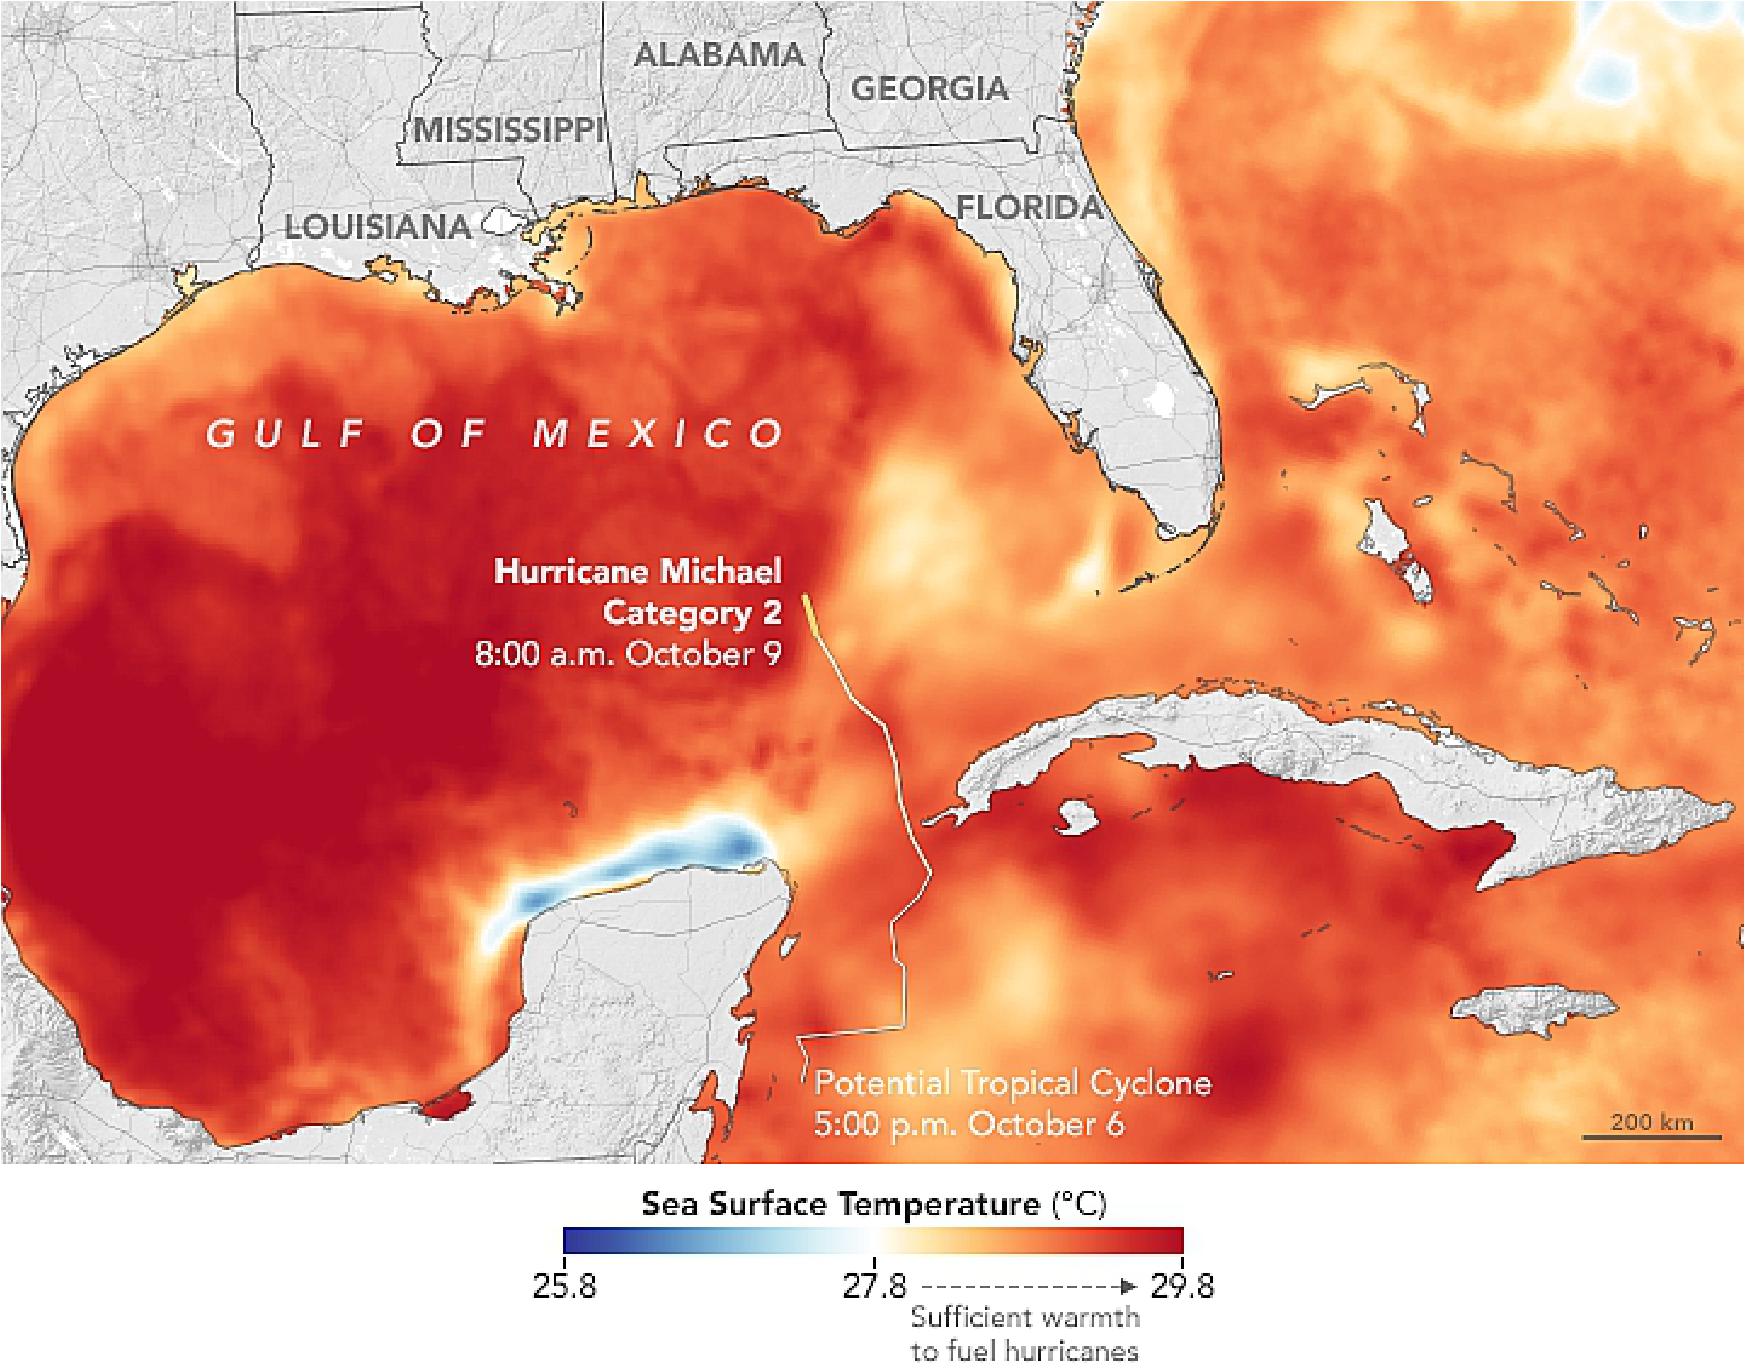 Figure 53: This map shows SSTs (Sea Surface Temperatures) on October 8-9, 2018. Meteorologists generally agree that SSTs should be above 27.8ºC to sustain and intensify hurricanes (although there are some exceptions). The data for the map were compiled by Coral Reef Watch, which blends observations from the Suomi NPP, MTSAT, Meteosat, and GOES satellites and computer models. Information about the storm track and winds come from the National Hurricane Center (image credit: NASA Earth Observatory, image by Joshua Stevens and Lauren Dauphin using SST data from Coral Reef Watch, story by Adam Voiland)